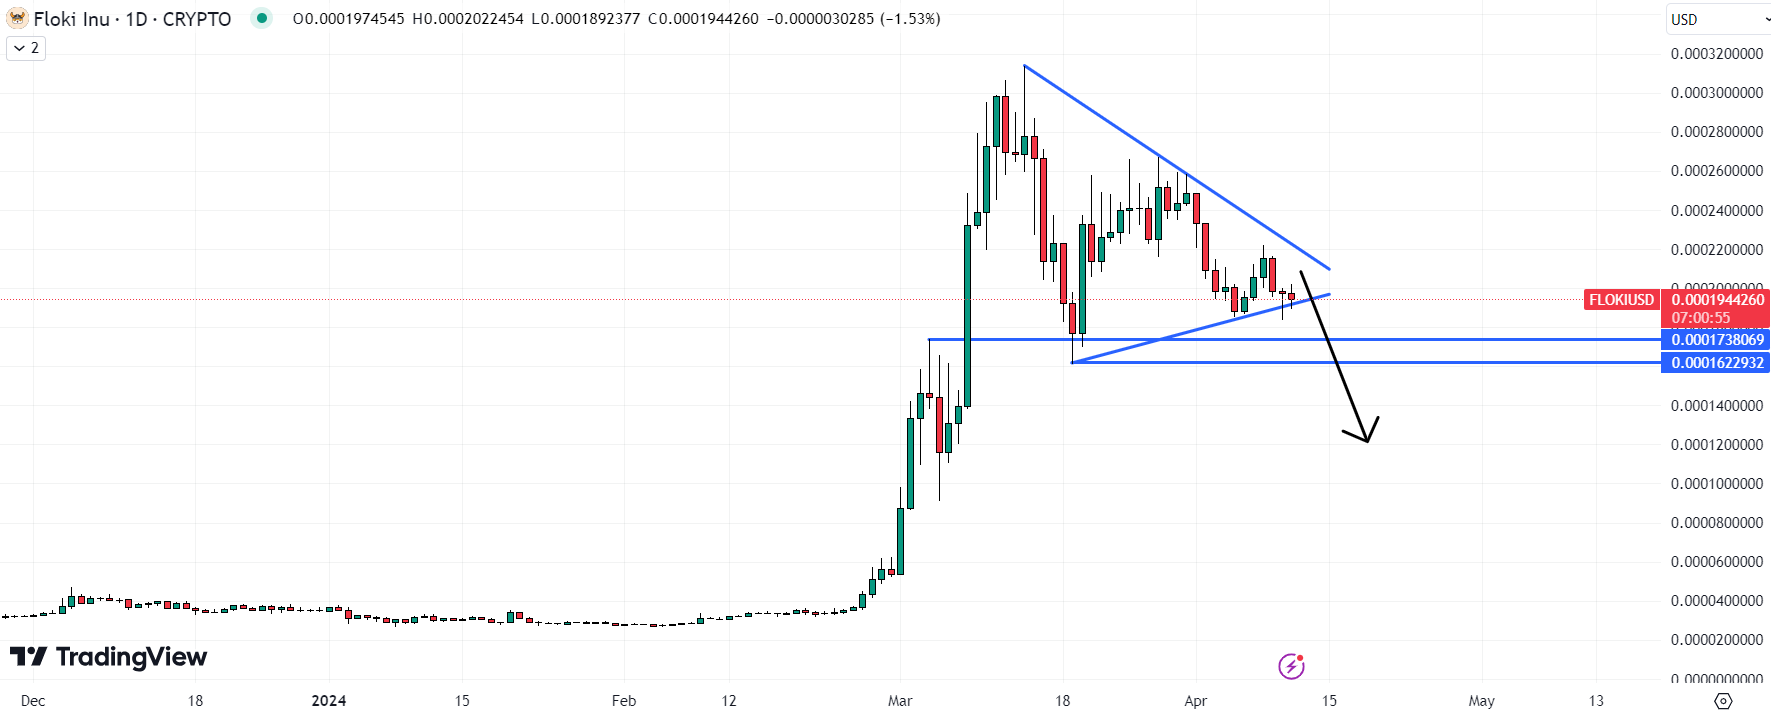 The Floki Inu Price is at risk of seeing a sharp decline in the coming sessions should these key levels break. Source: TradingView